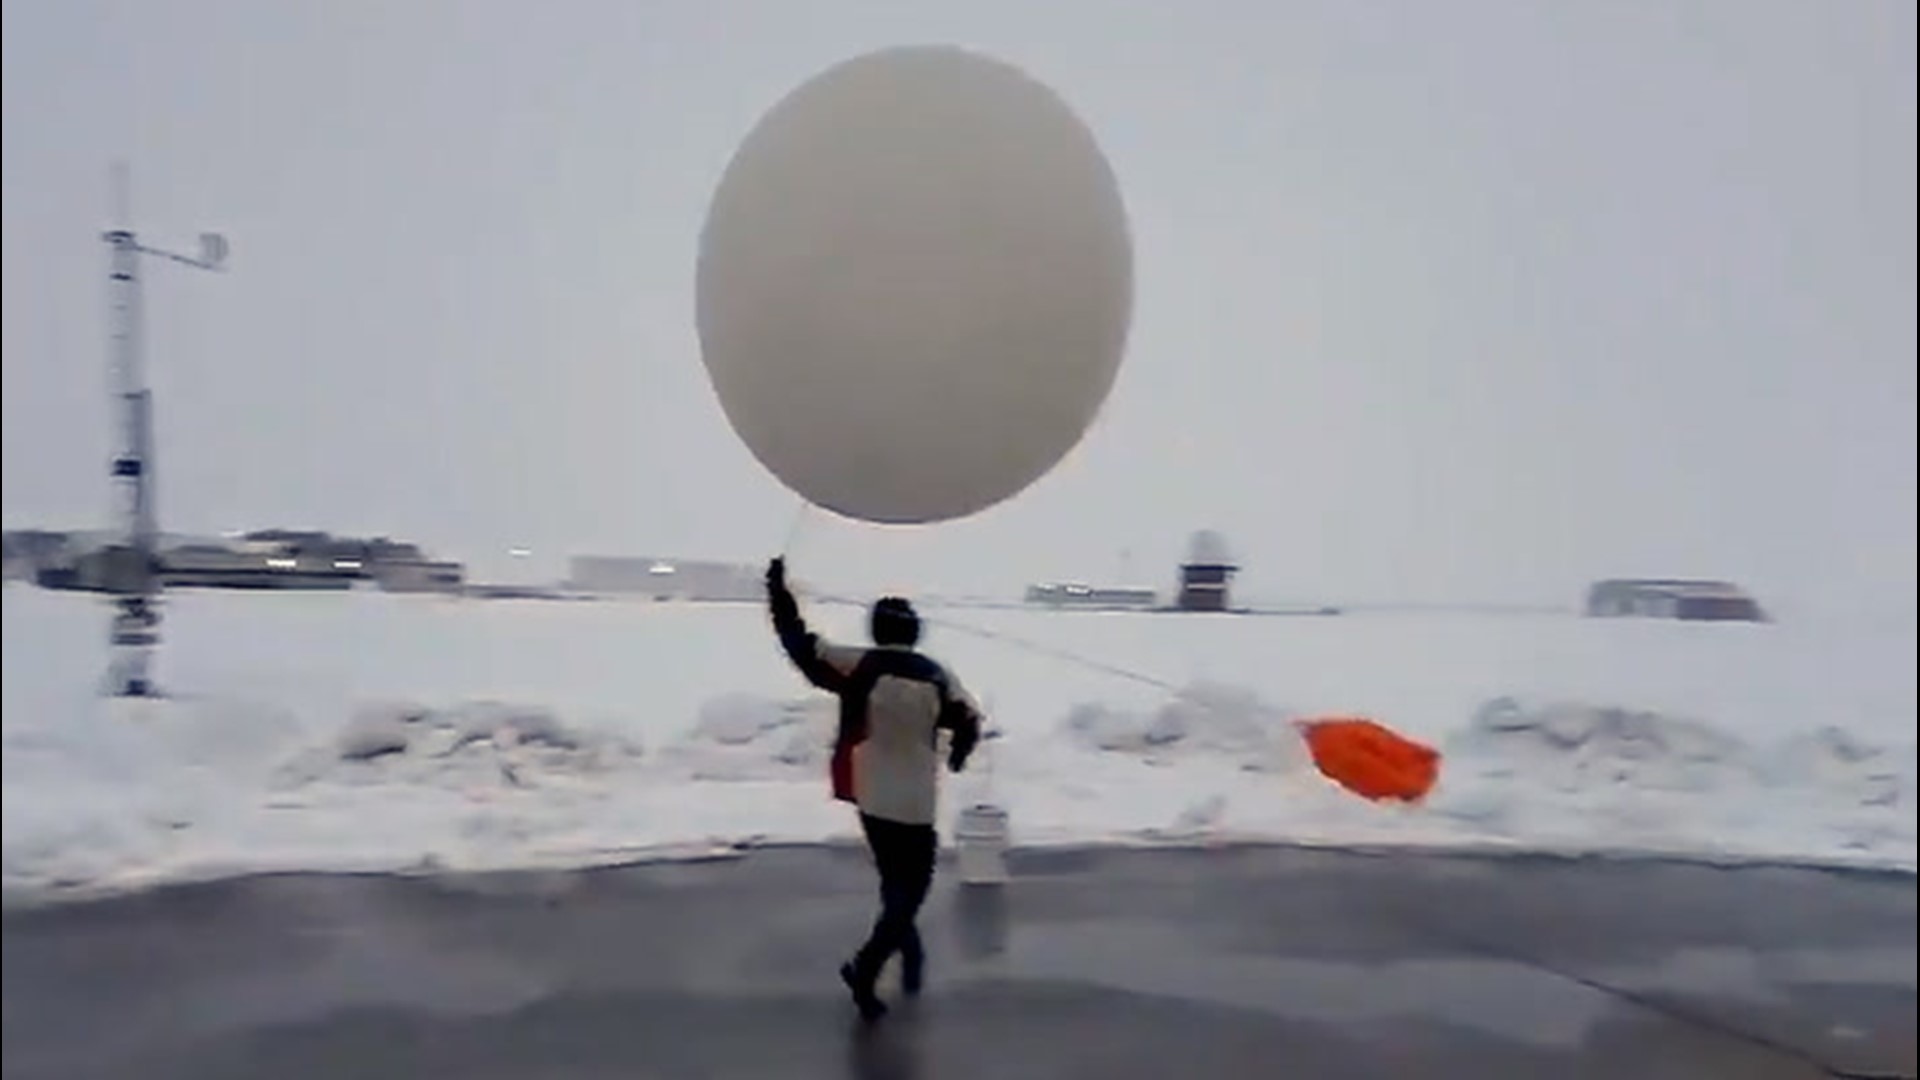 As a winter storm brought snow, heavy at times, to Iowa on Jan. 25, it was up to one National Weather Service worker to brave the blustery conditions and launch a weather balloon.